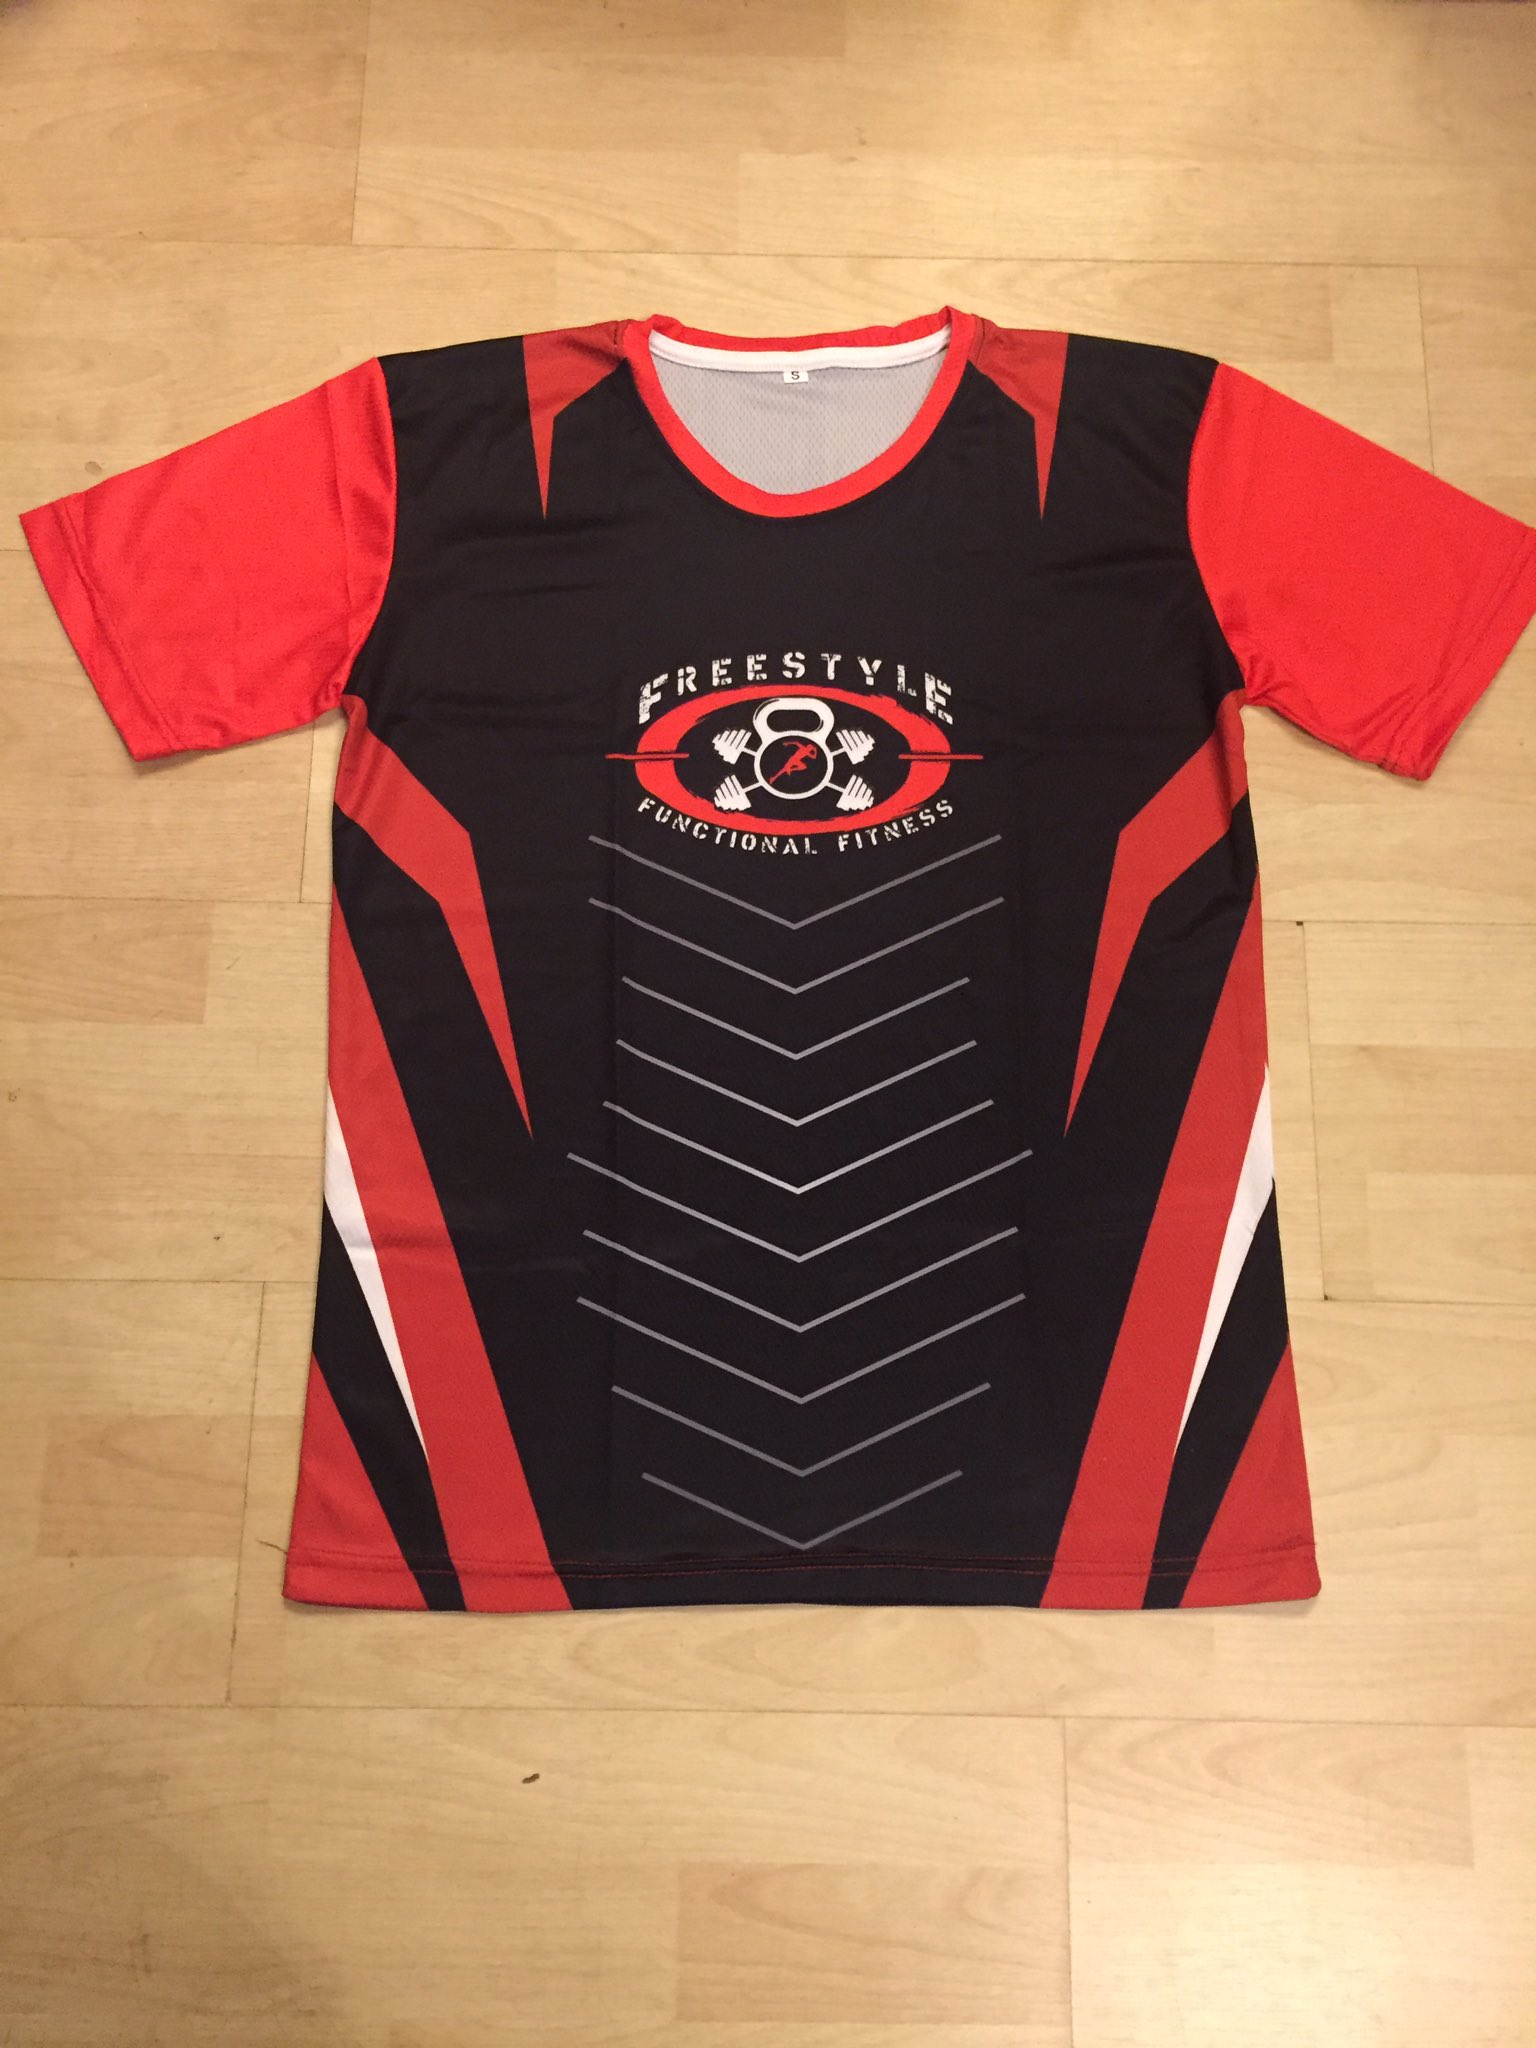 Matt Sports on X: Fully sublimation custom tees done for freestyle OCR  team👍 Get in touch if you are looking for amazing quality custom gear.  #ocr #ocrworldchampionship #sublimatedtee #customtshirts #tshirt  #trainingtshirt #customapparel #